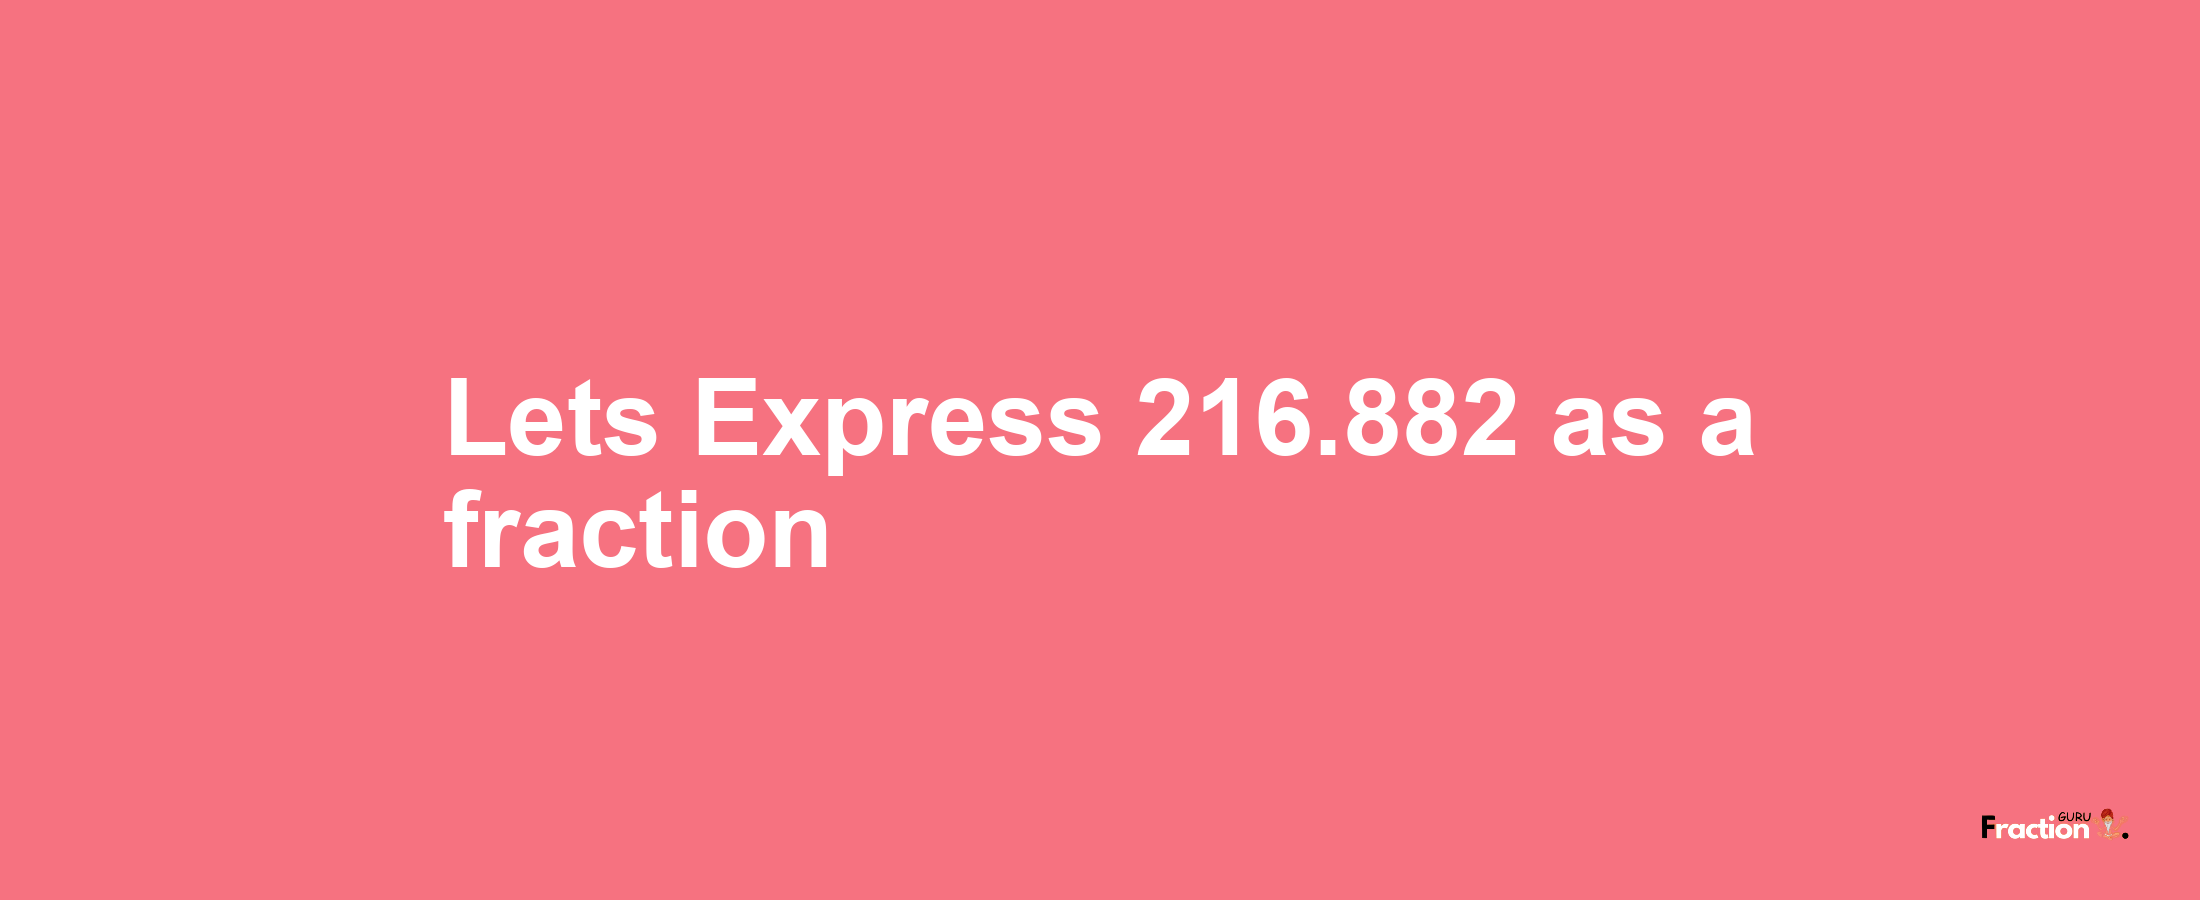 Lets Express 216.882 as afraction